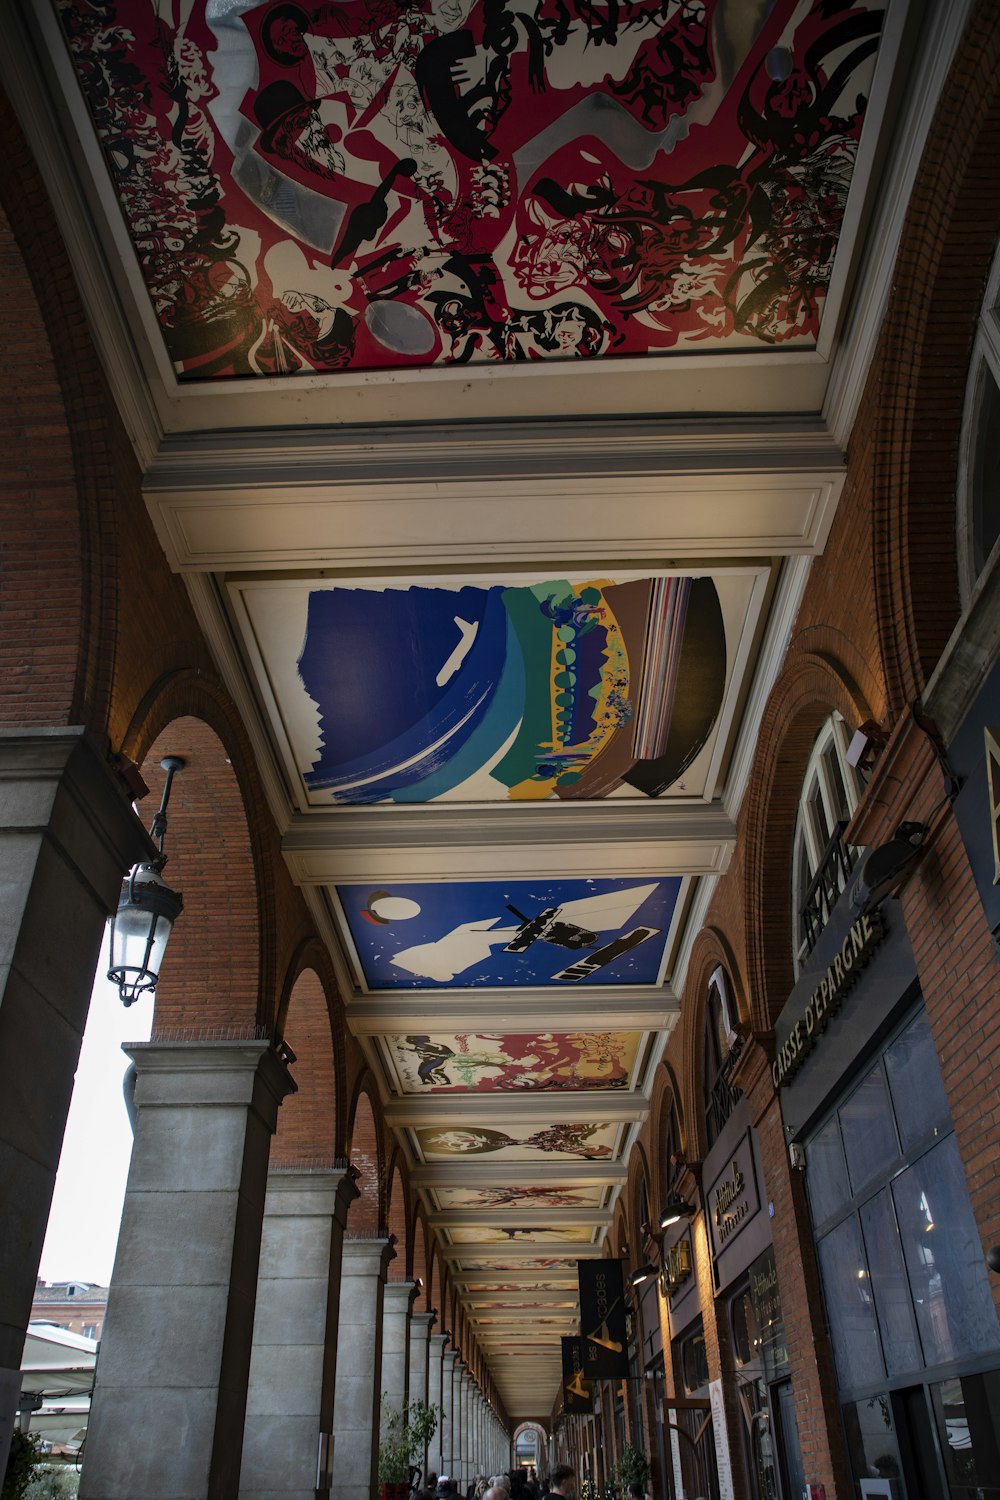 the ceiling of a building with a mural on it